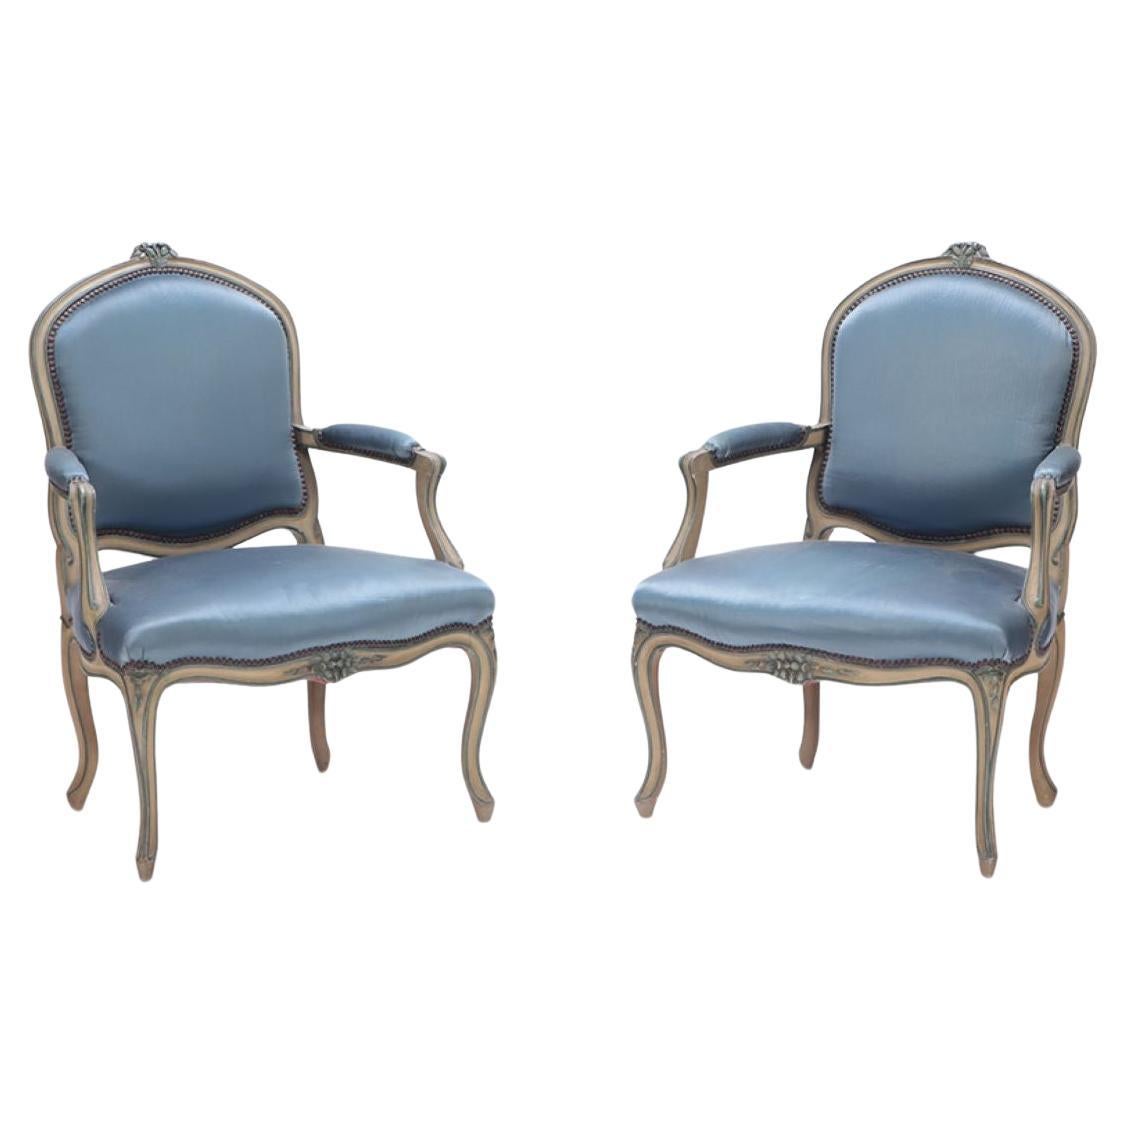 Pair of French Louis XV style open armchairs having carved frames circa 1920.